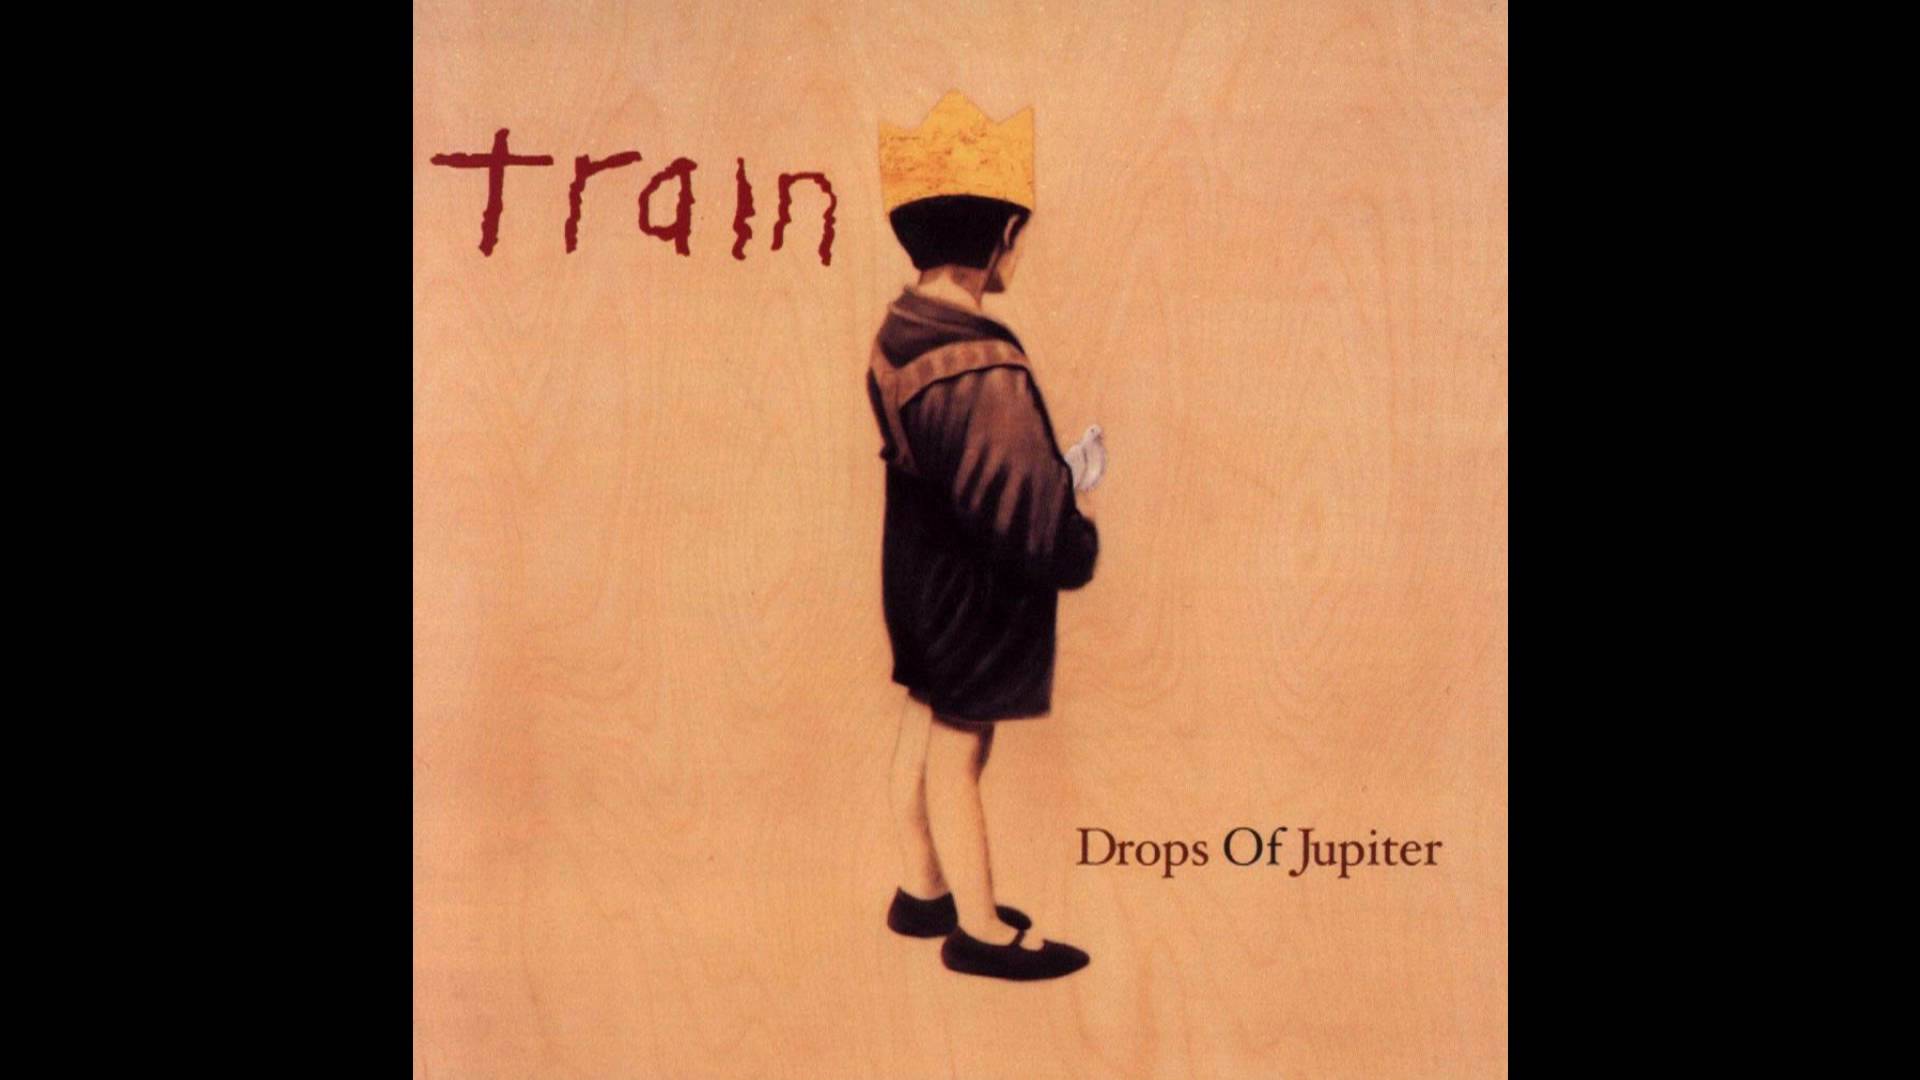 Train Drops Of Jupiter Album PC Android iPhone and iPad Wallpapers